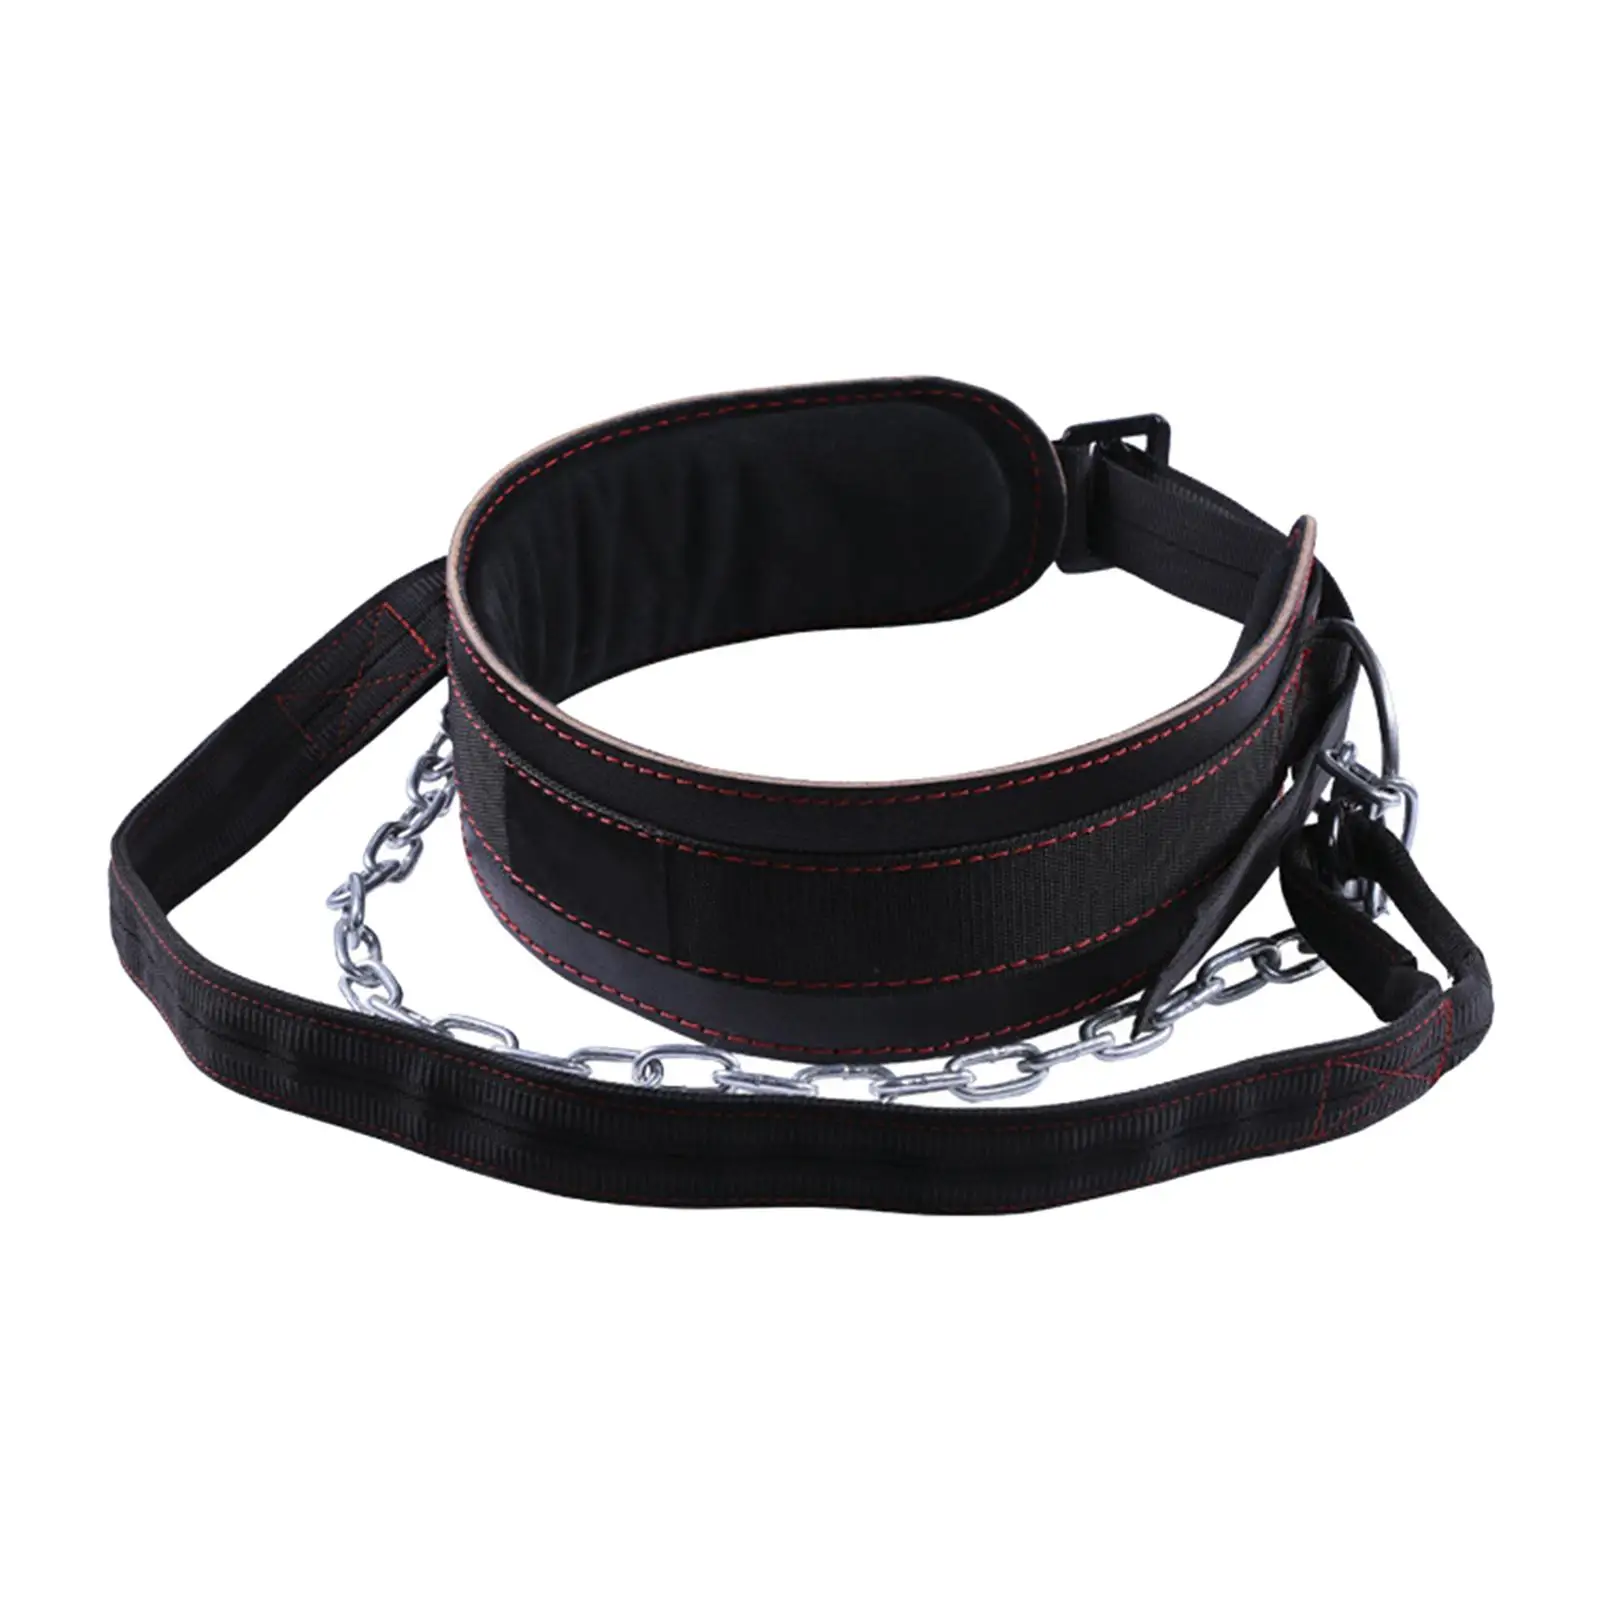 Fitness Weight Lifting Belt with Metal Chain Professional Trainer Weight Belt Lifting Belt for Power Lifting Strength Training